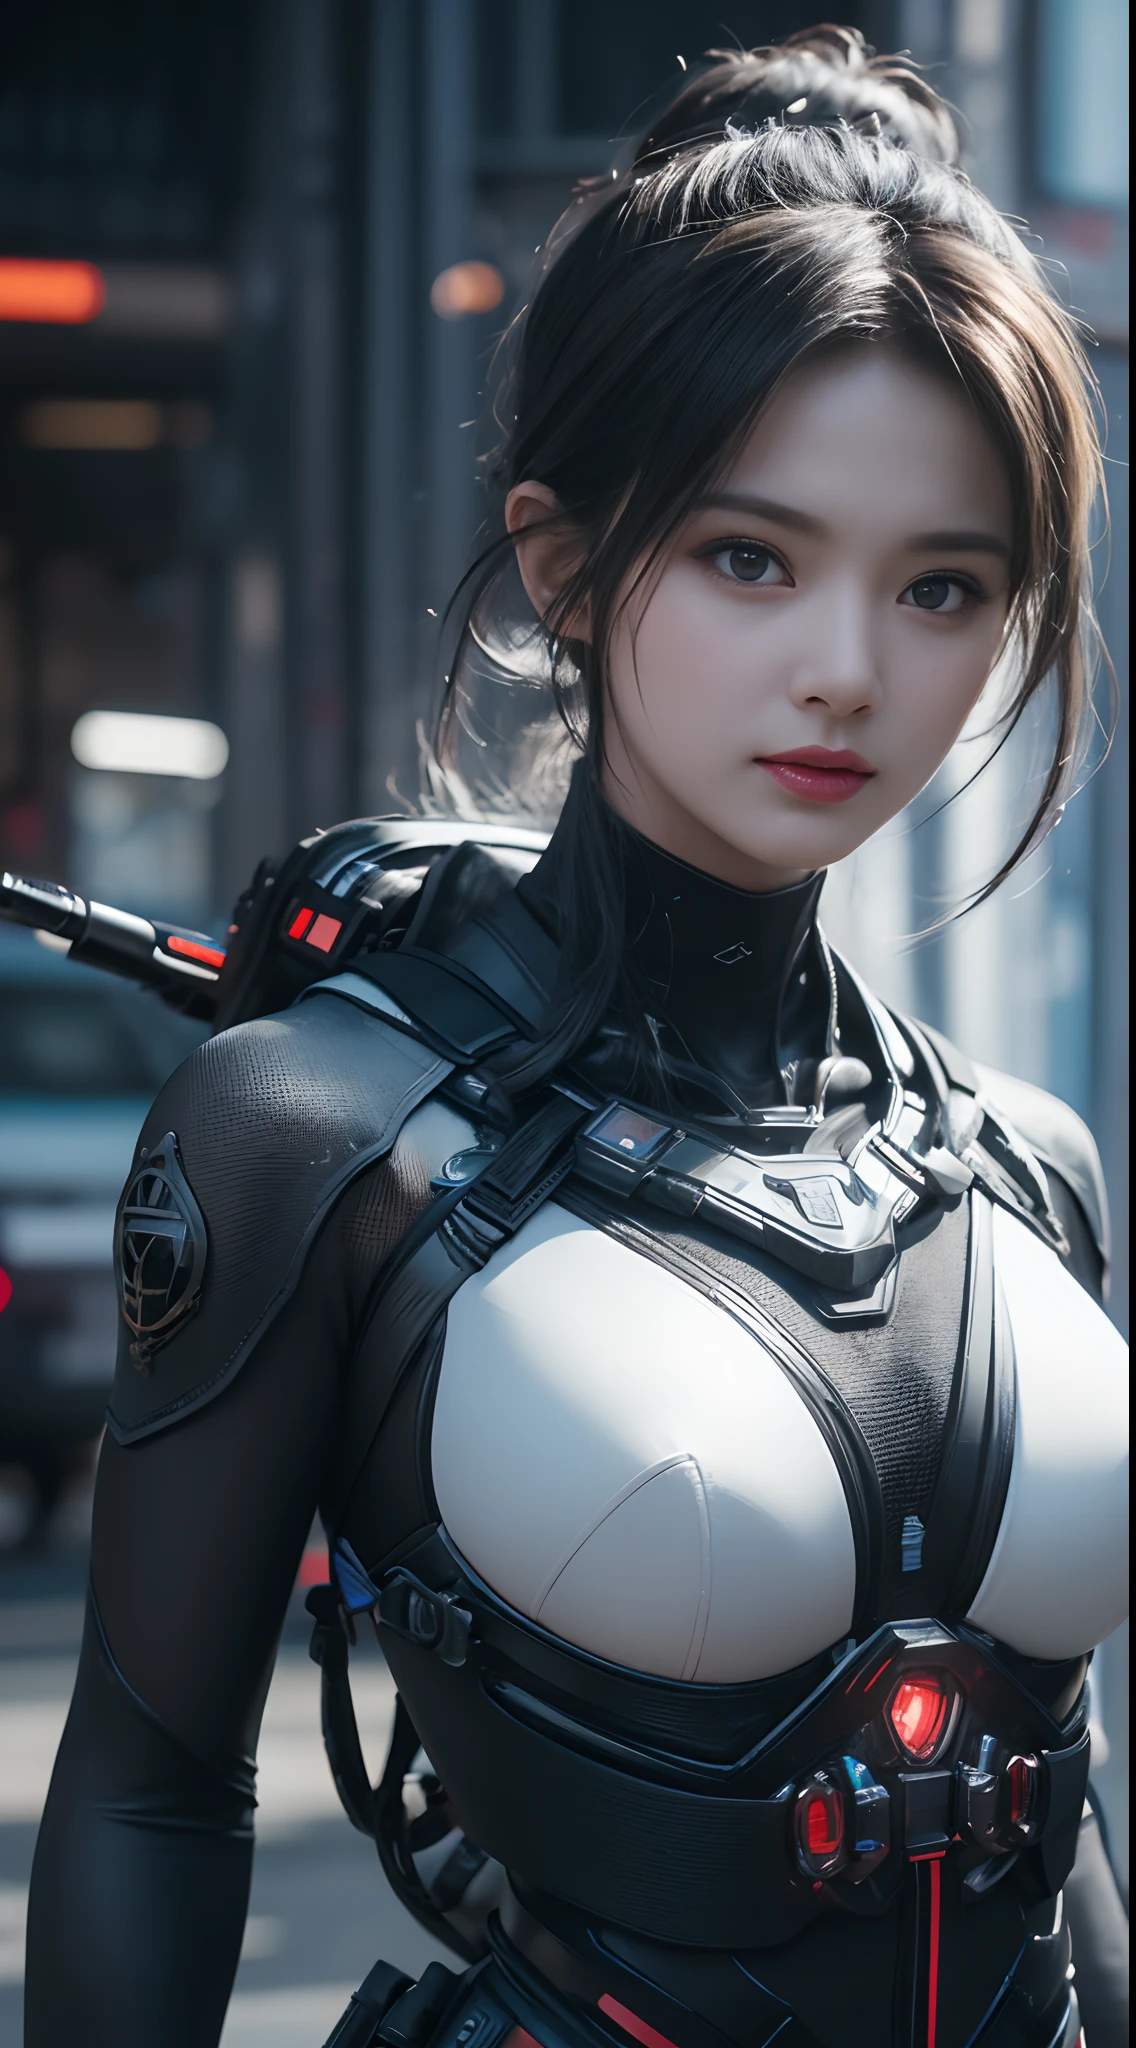 ((Best quality)), (Masterpiece)), (Details:1.4), Beautiful cyberpunk woman image,hdr,HighDynamicRange),Ray tracing,NVIDIA RTX,Super resolution,Unreal 5,Subsurface scattering,PBR Texture,Post-processing,Anisotropic filtering,Depth of field,Maximum clarity and sharpness,Many-Layer Textures, Albedo and specular maps, Surface coloring, Accurate simulation of light-material interactions, Perfect proportions, Octane rendering, Two-tone lighting, Wide aperture, Low ISO, White balance, Rule of thirds, 8K raw data, Otherworldly